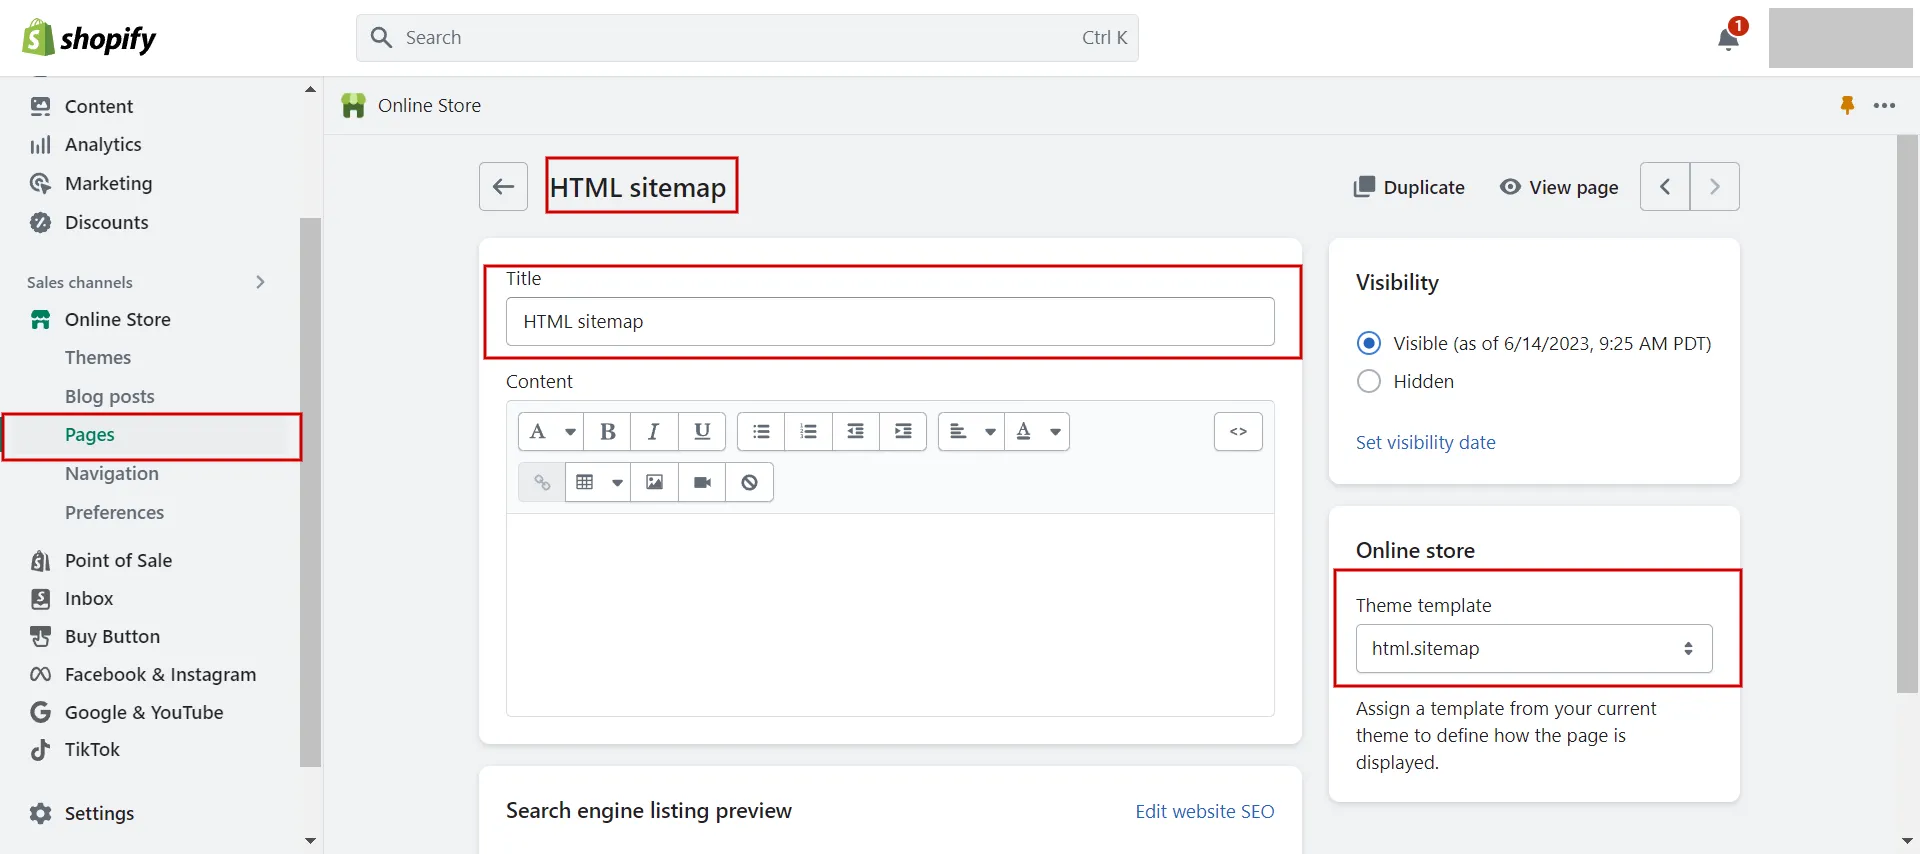 Add a new page named HTML sitemap